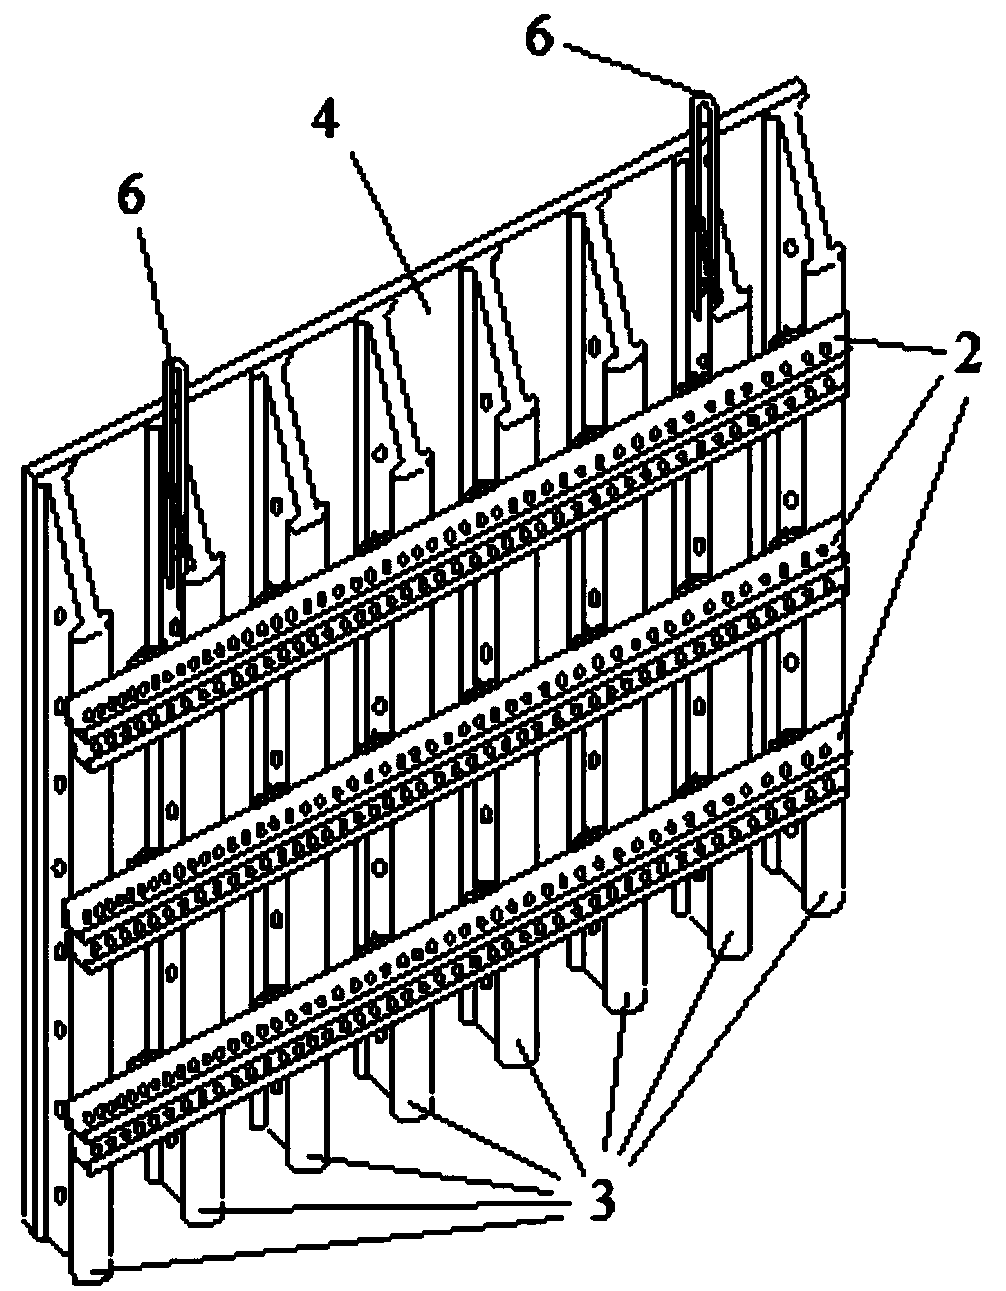 A construction method for single side wall formwork support system